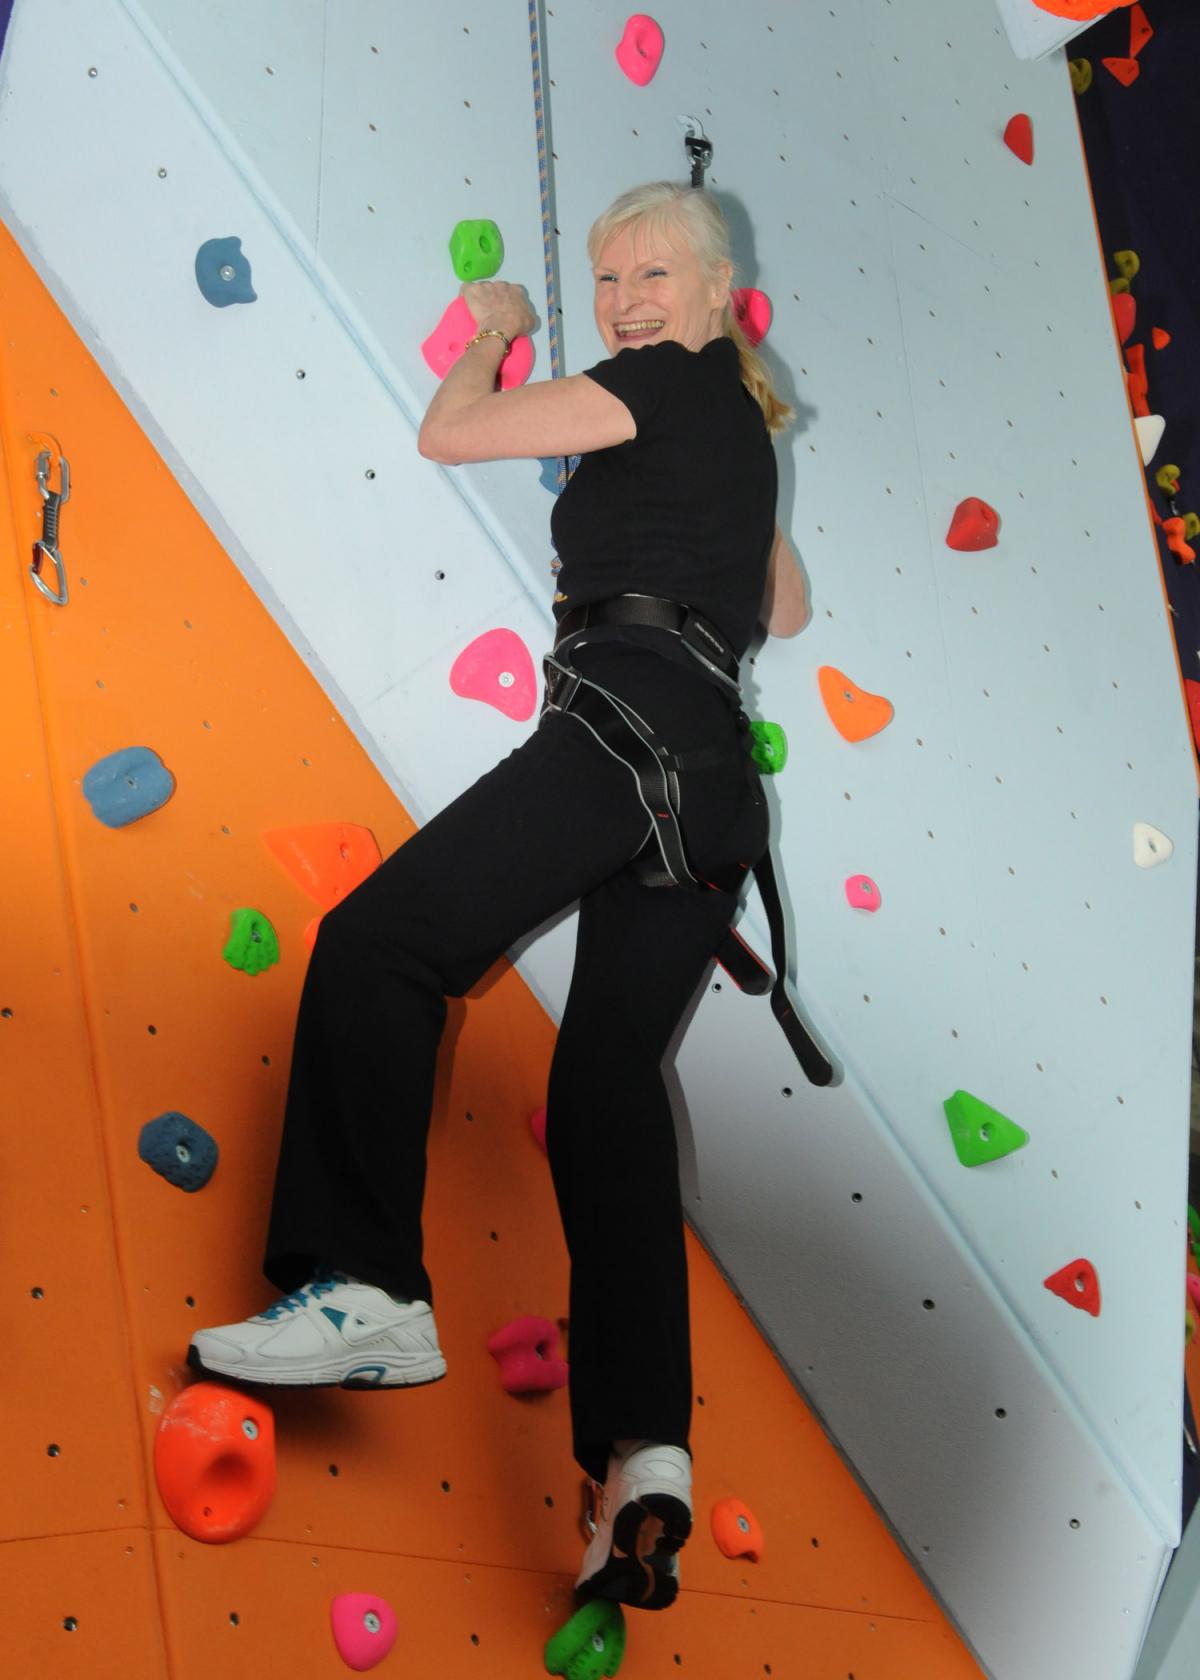 Climbing wall, Wycombe Leisure Centre - ARM Images